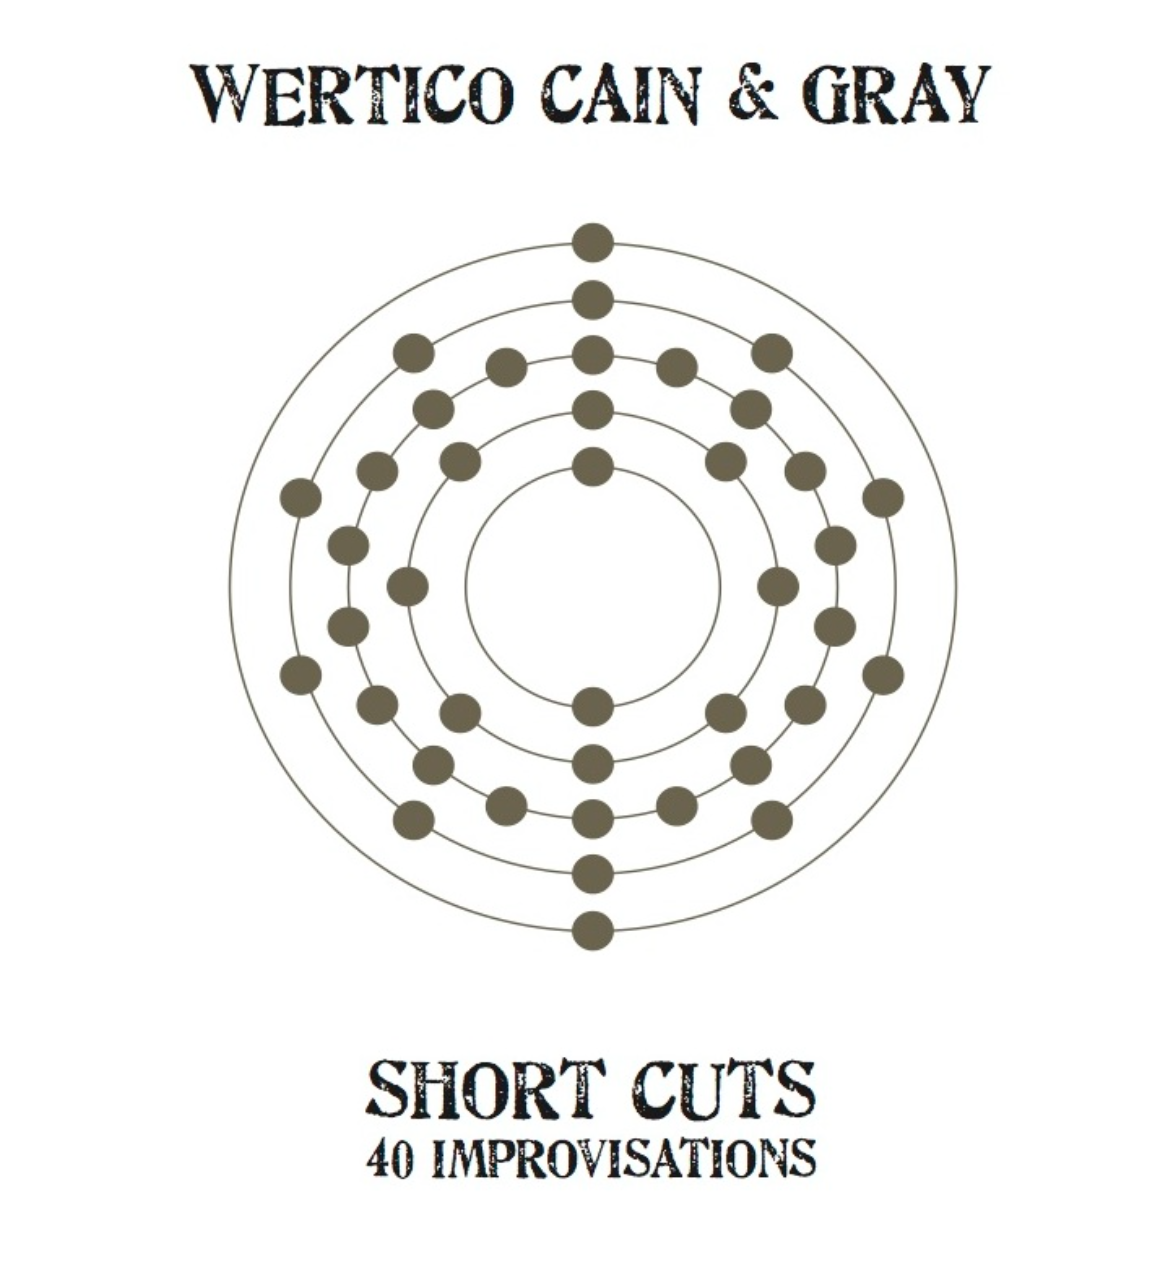 Wertico Cain and Gray Short Cuts